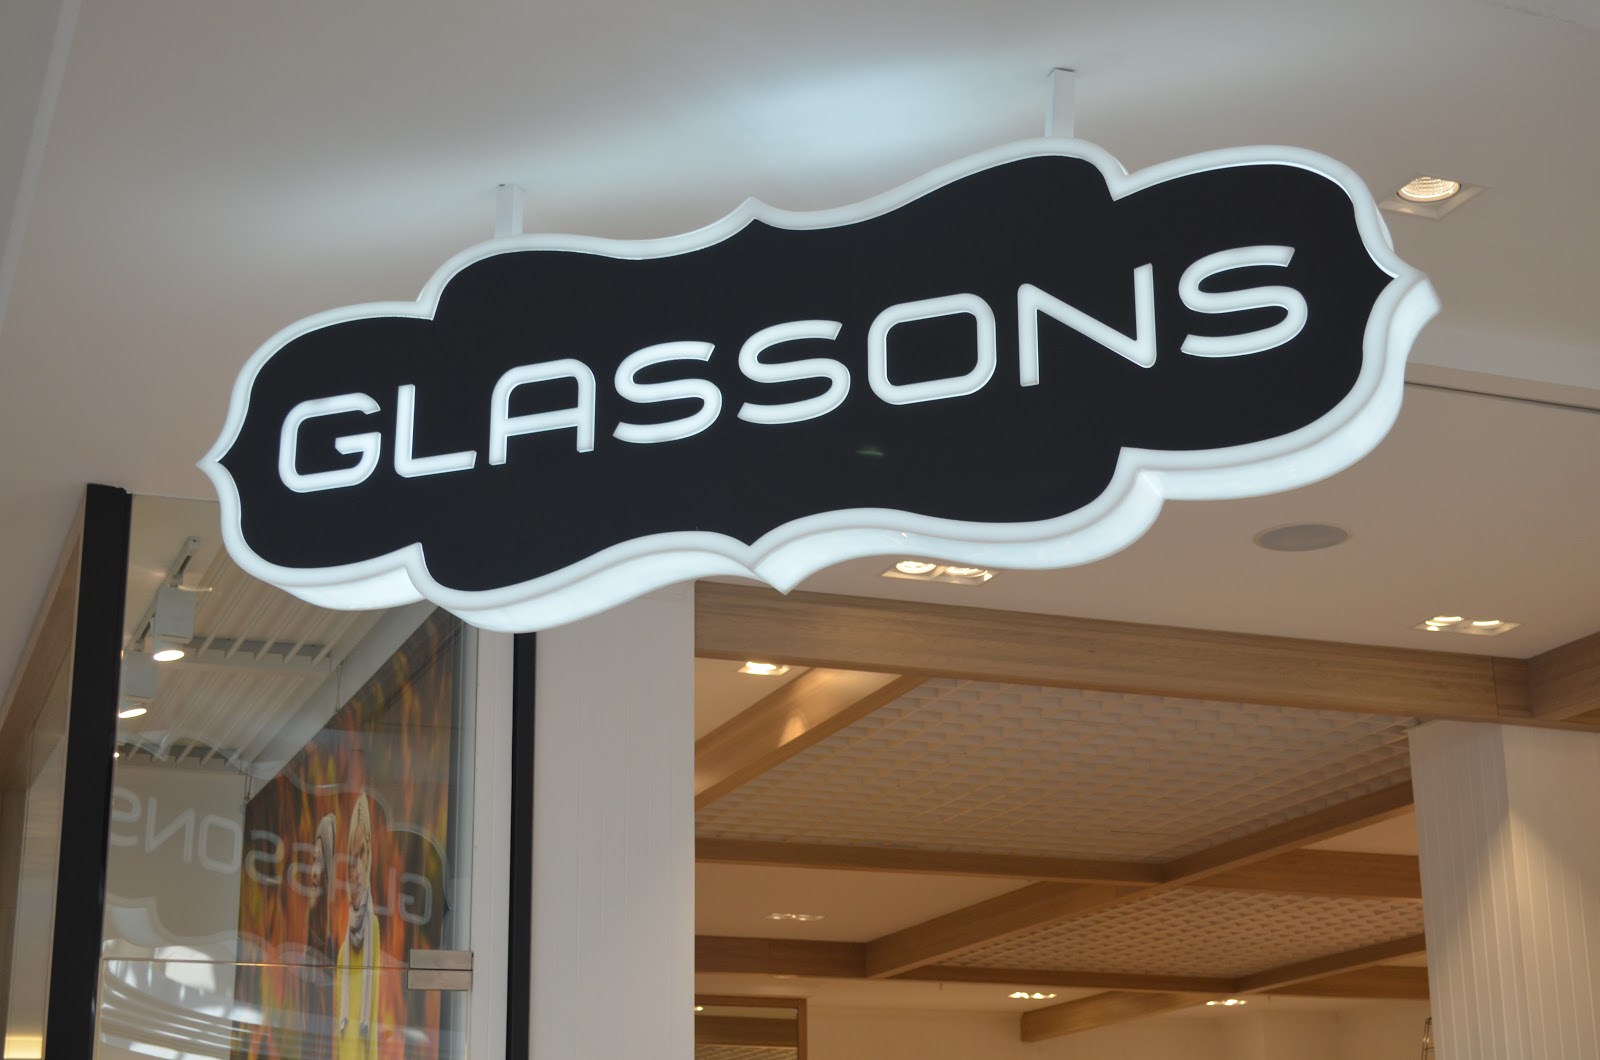 Dusty Petals: Highpoint Retailer Profile: Glassons
